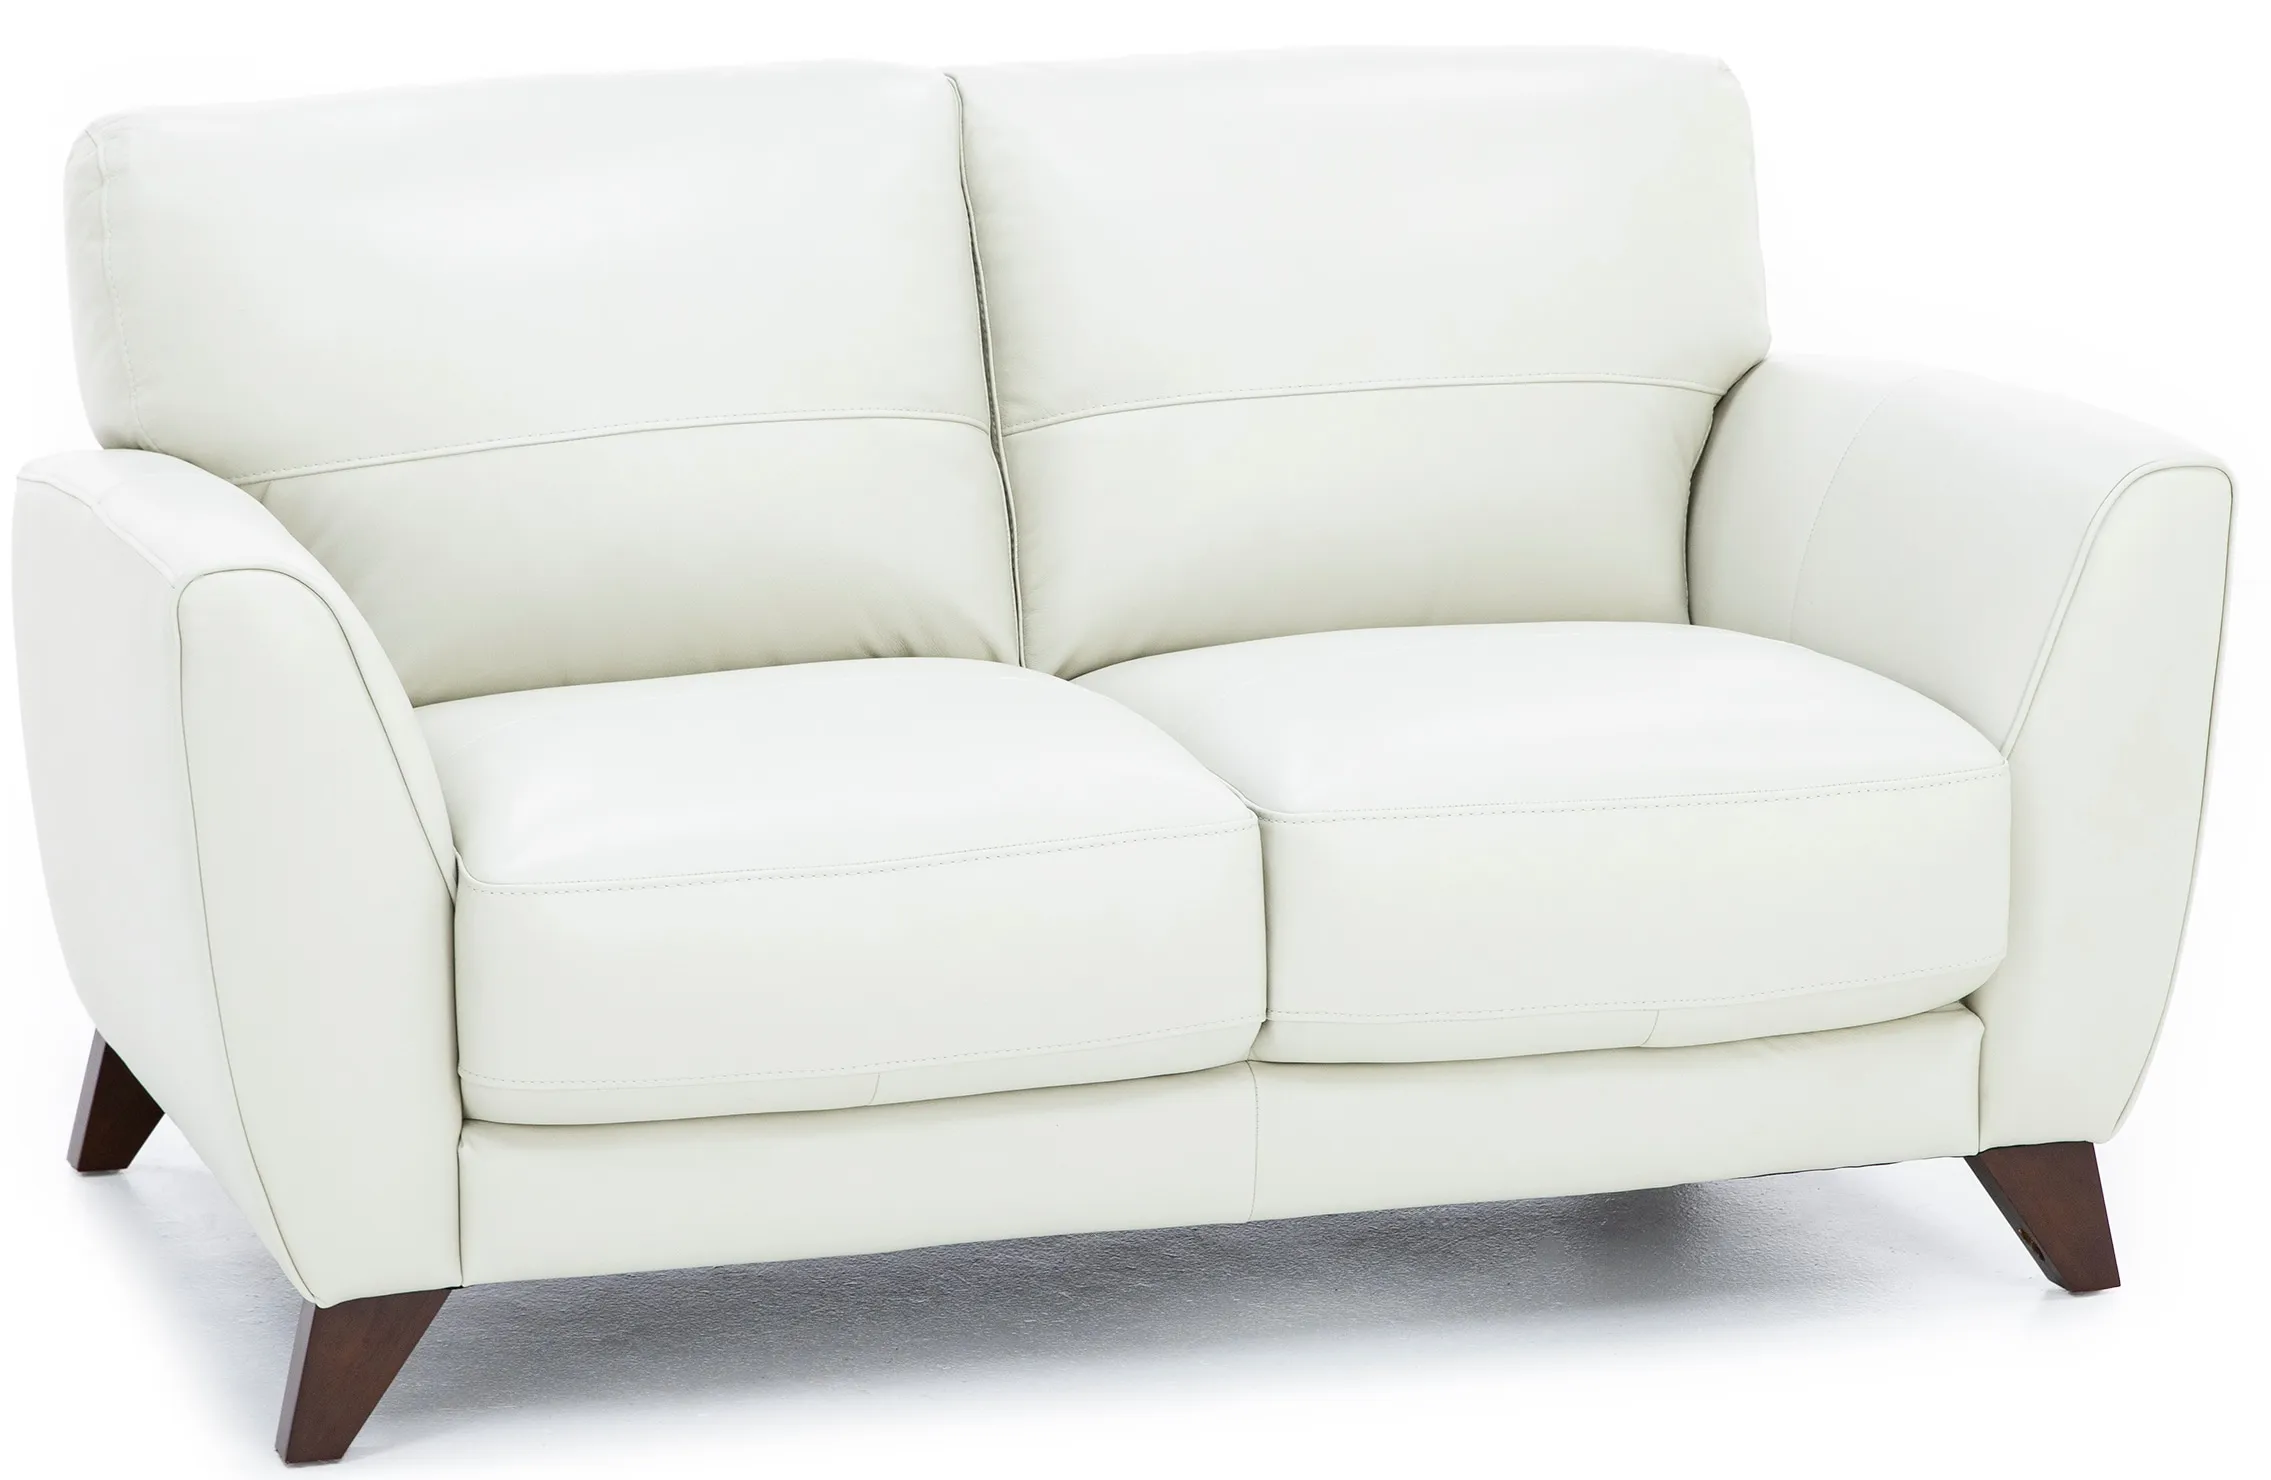 Paloma Leather Loveseat in Ice